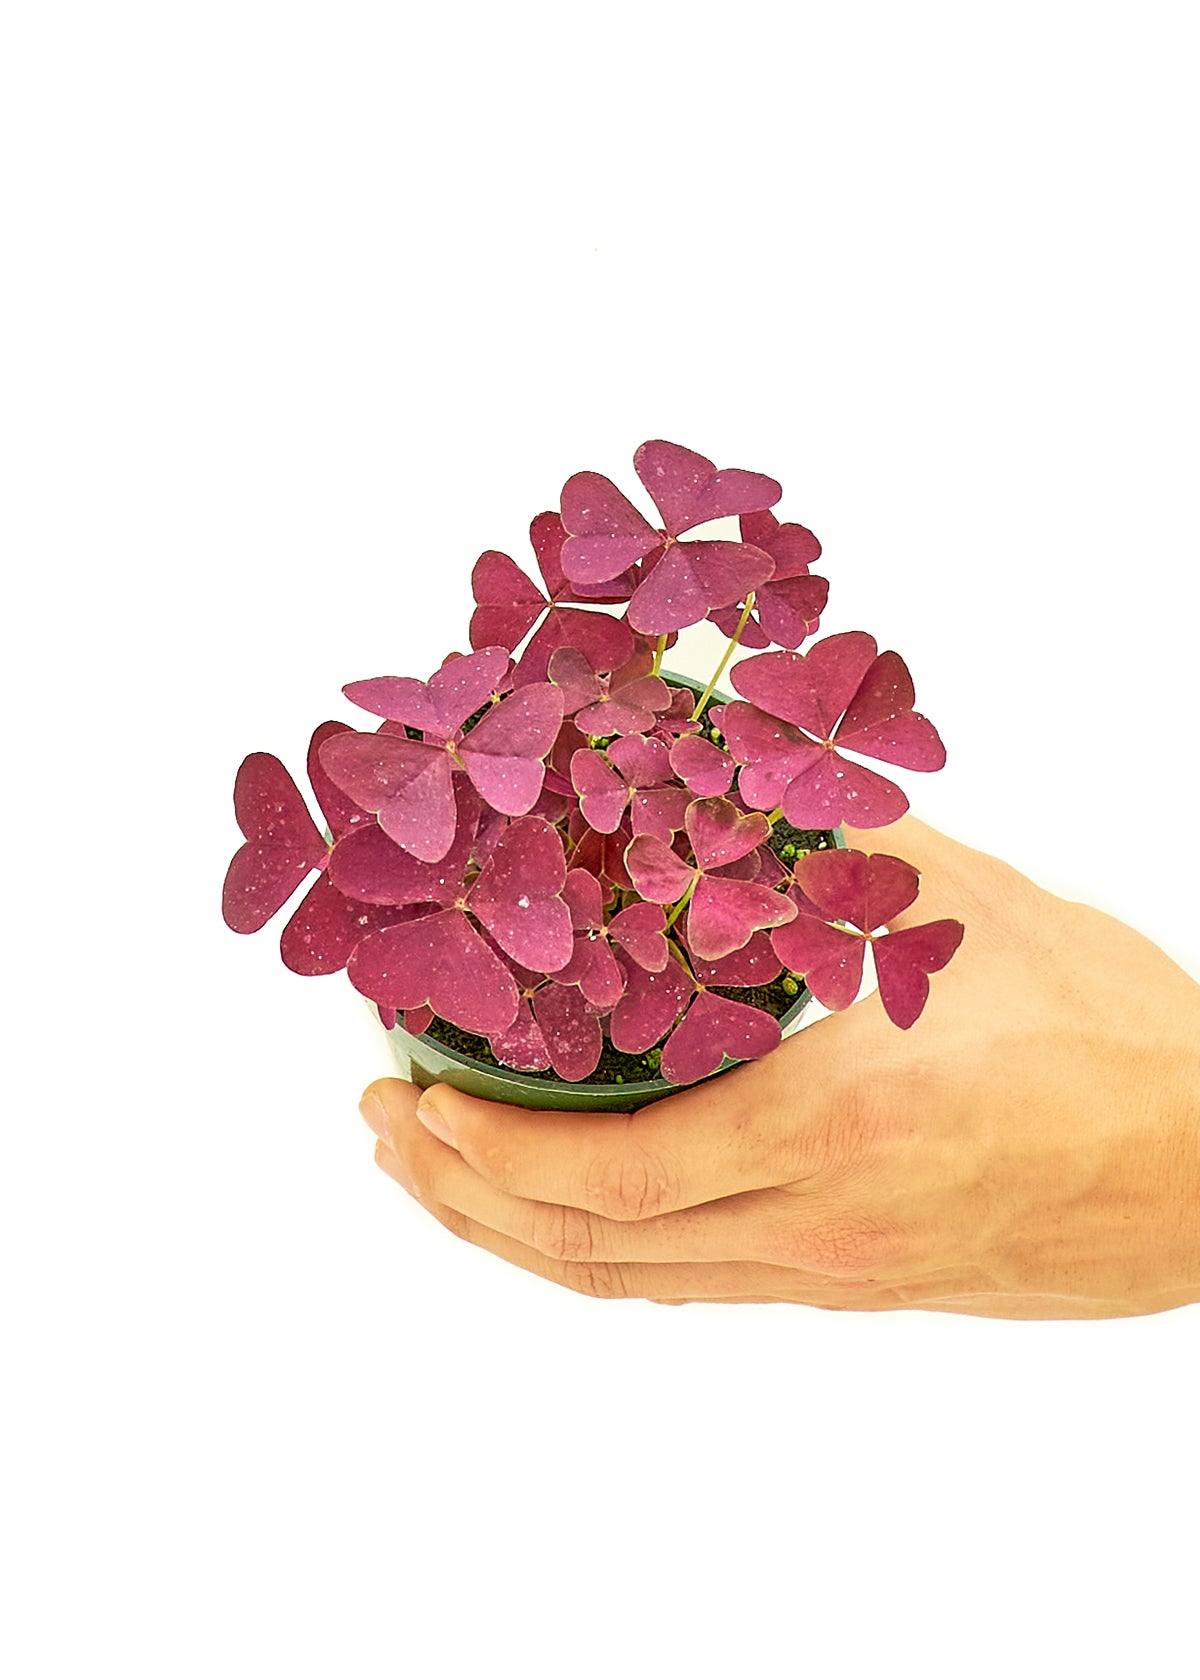 Small size False Shamrock Plant in a growers pot with a white background with a hand holding the pot showing the top view